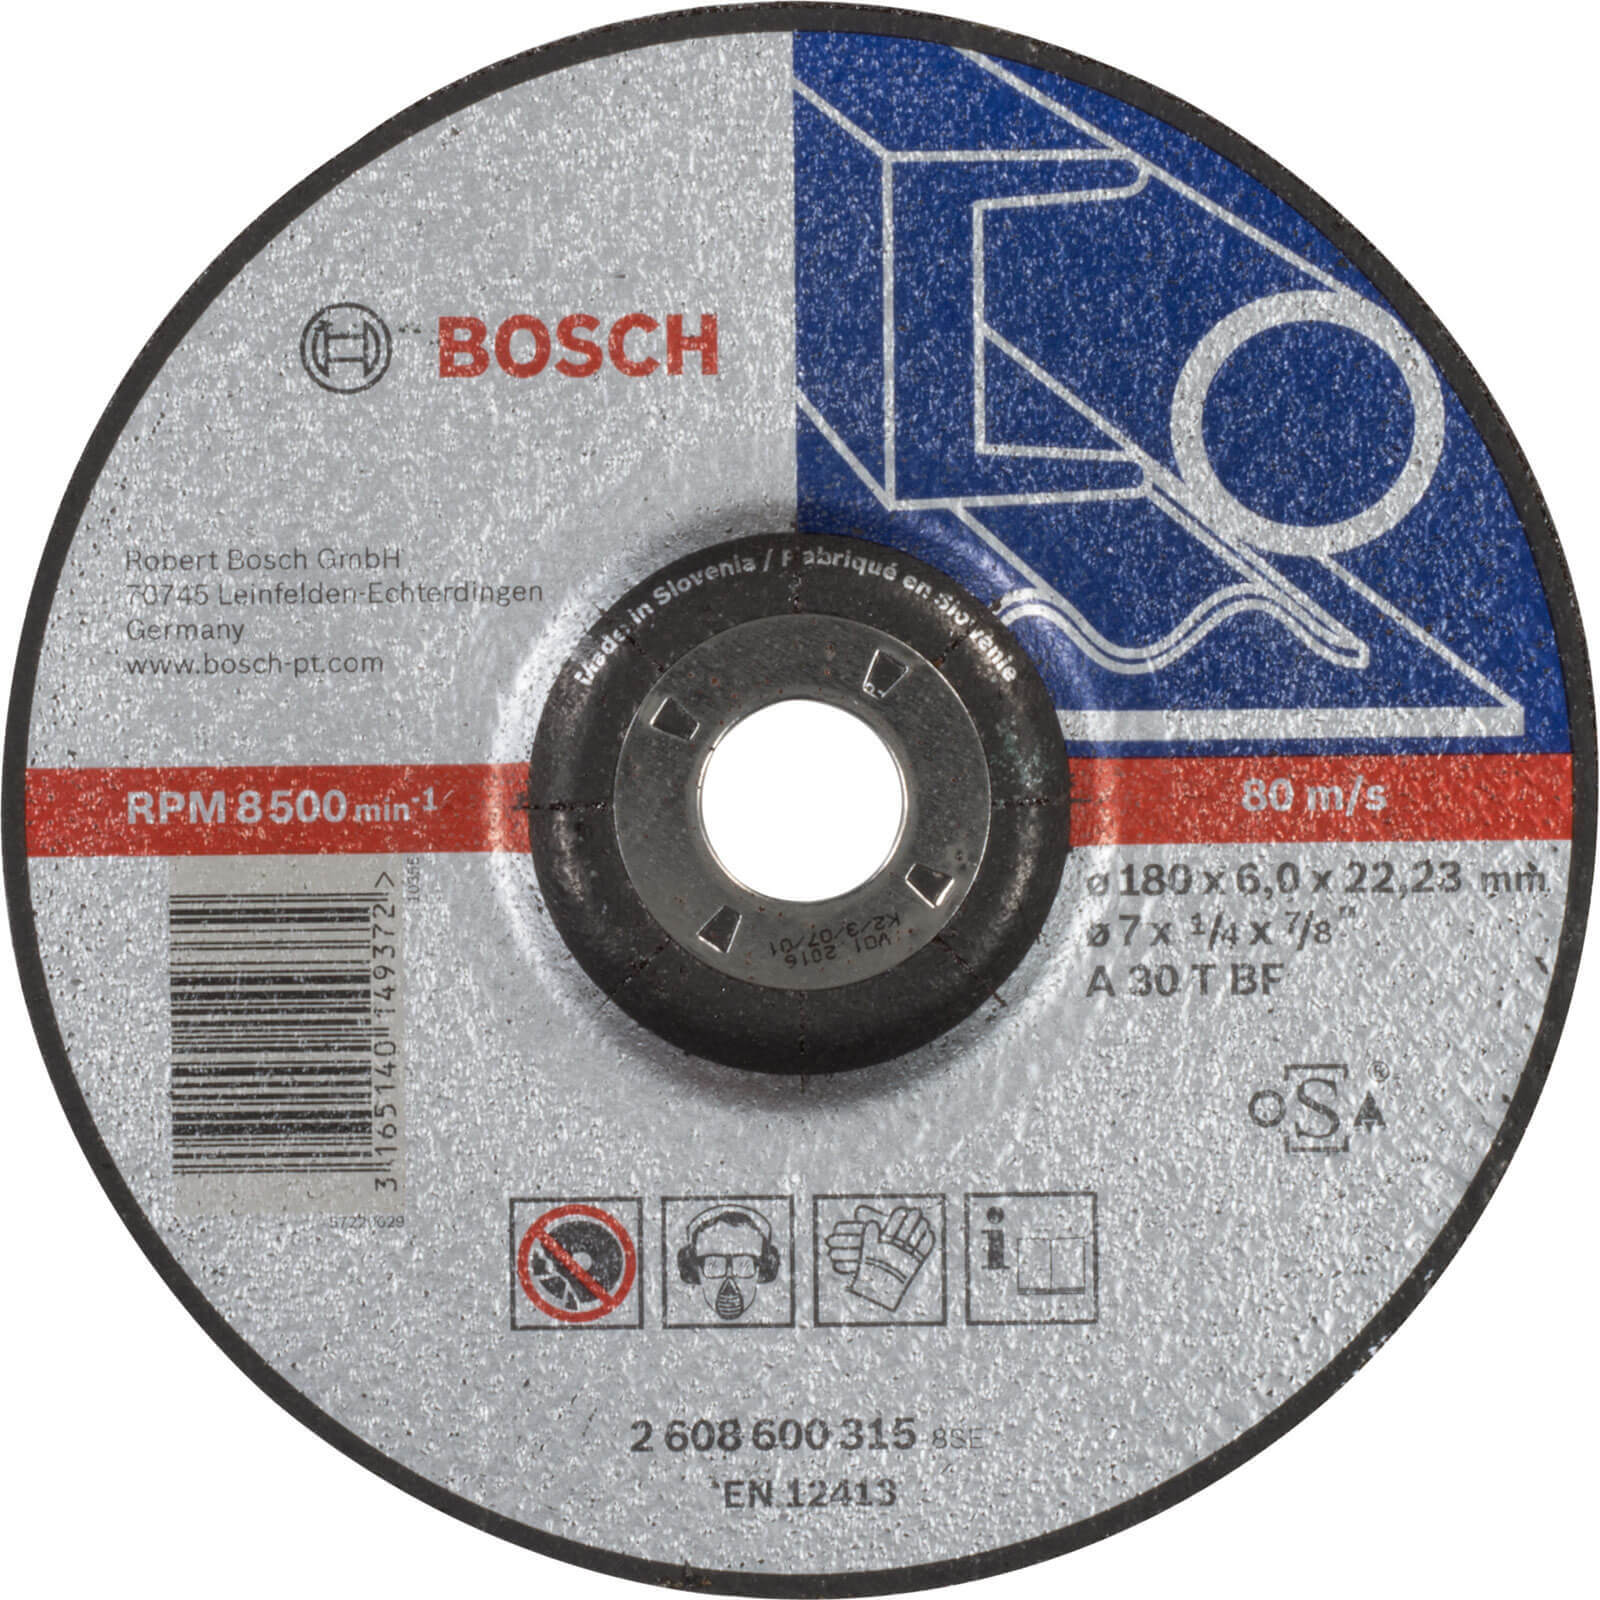 Image of Bosch A30T BF Drepressed Centre Metal Grinding Disc 180mm